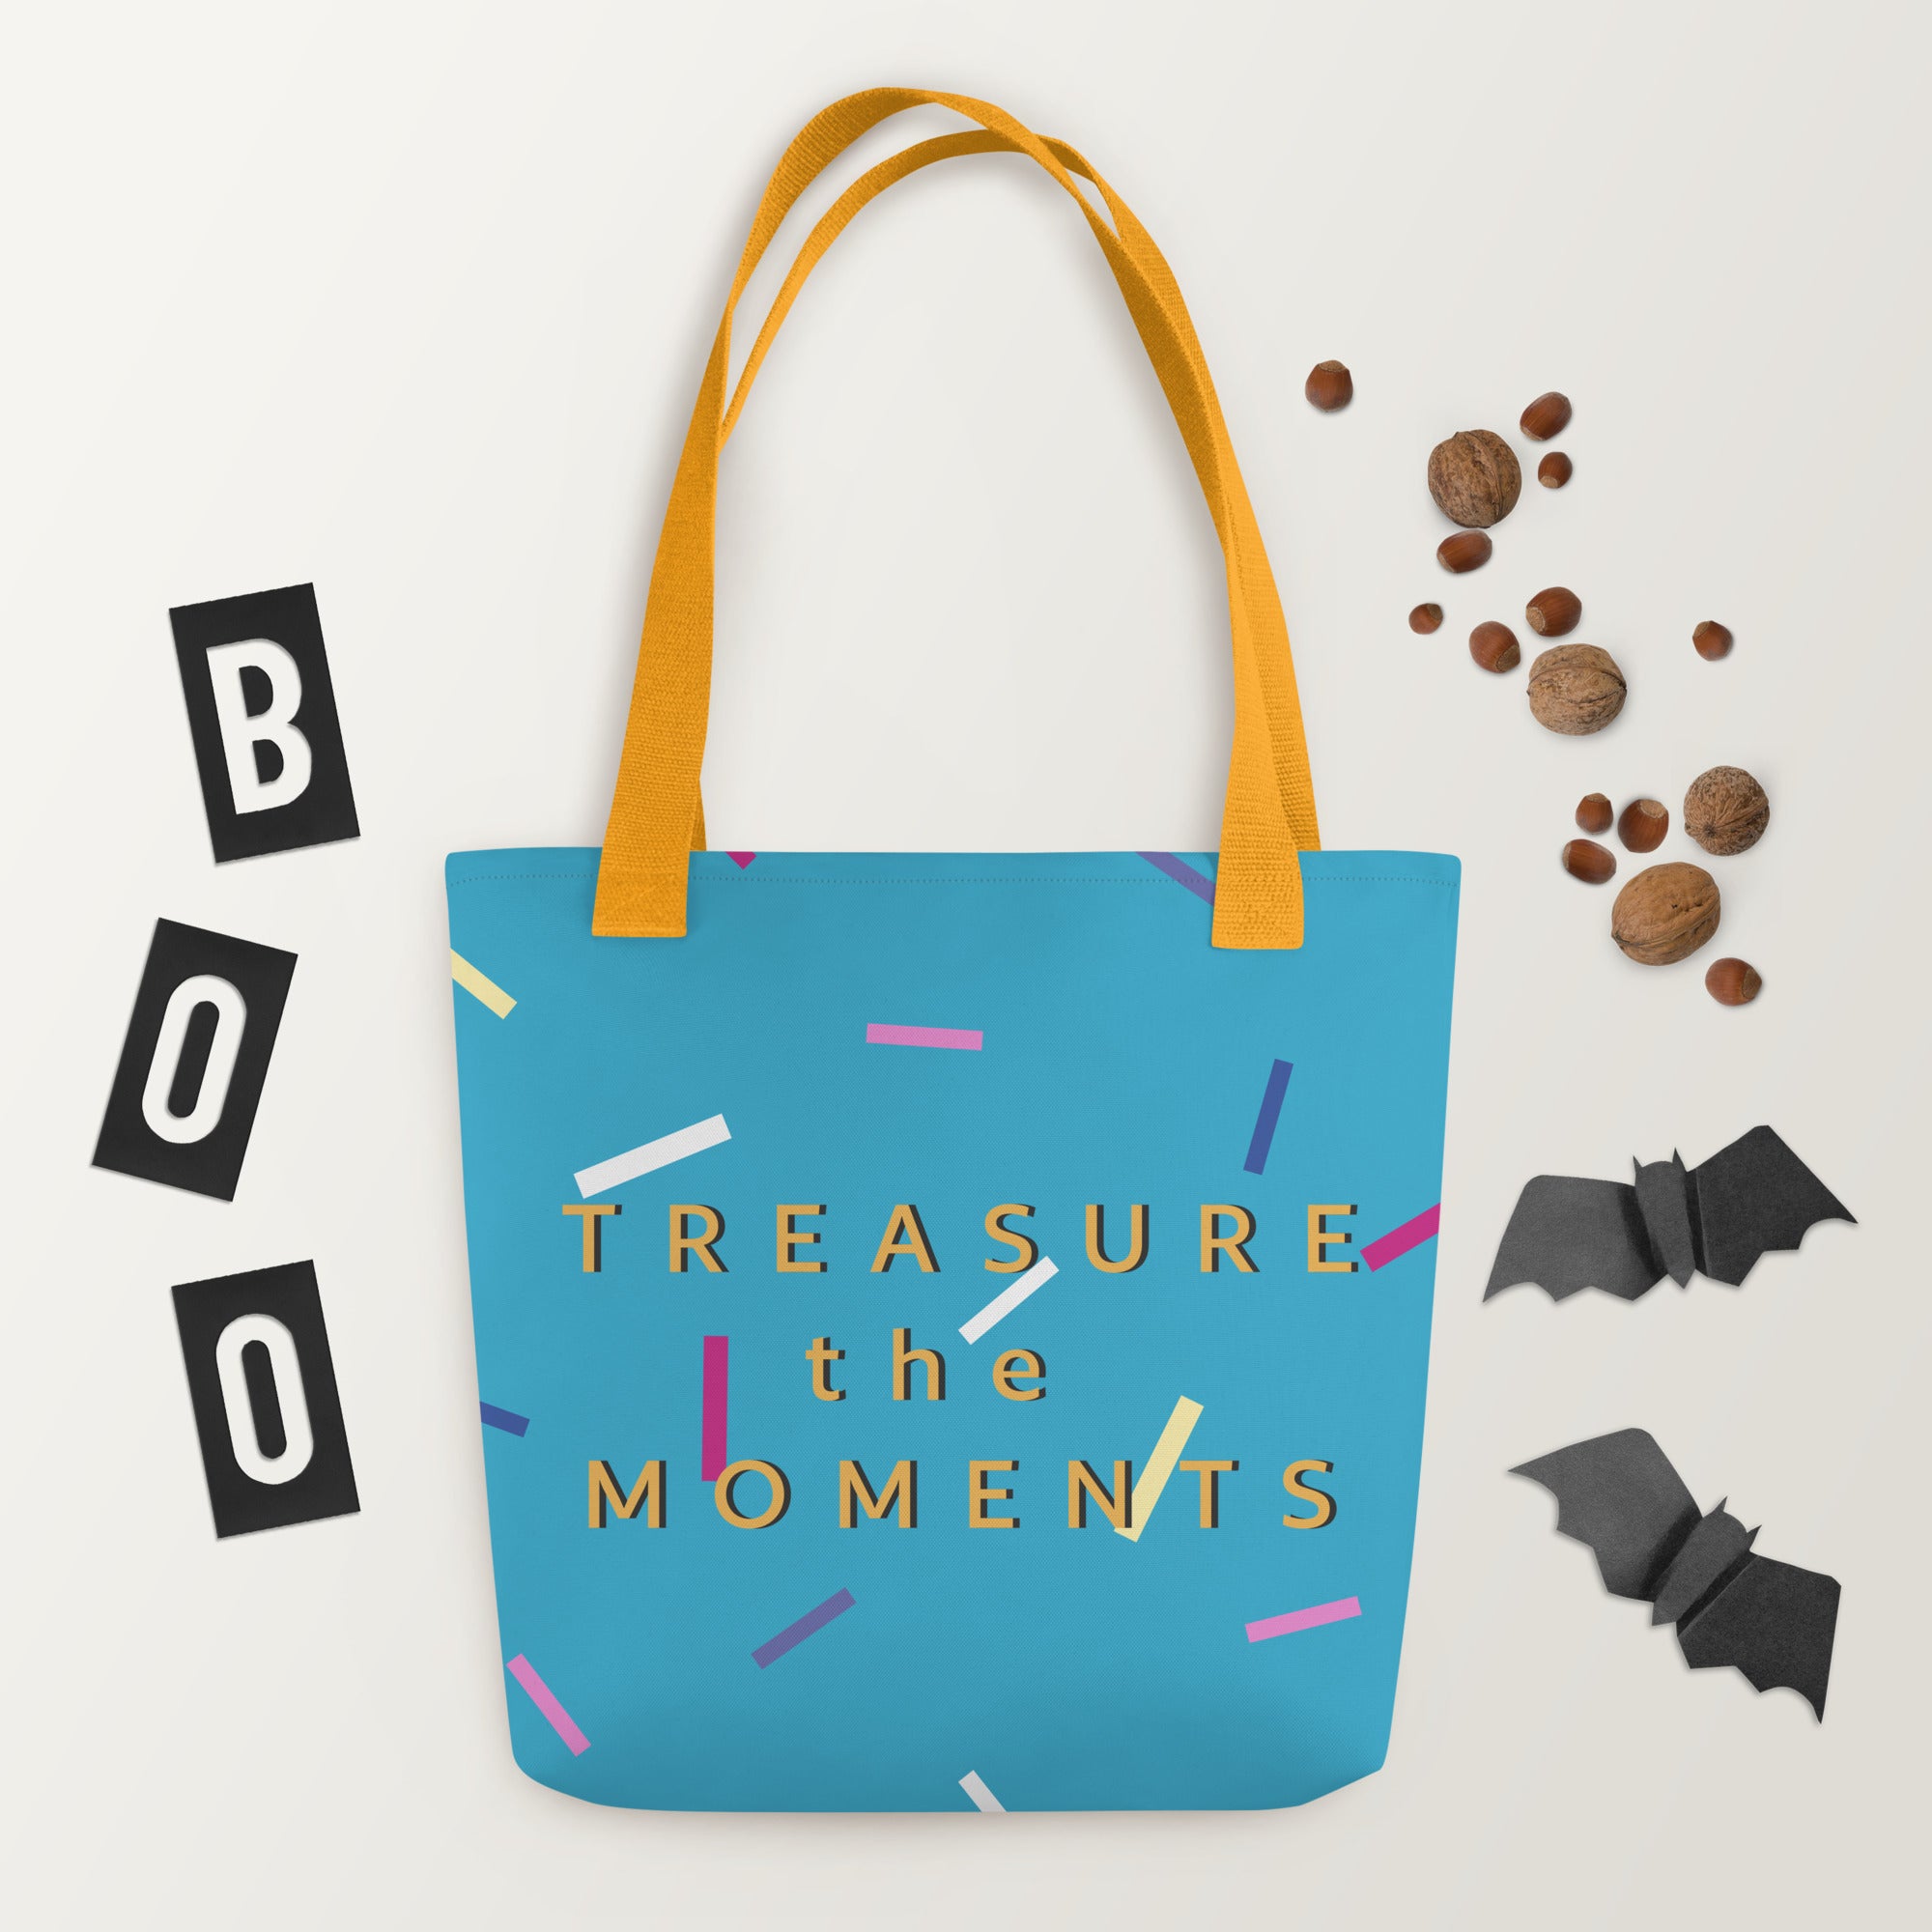 Treasure Bag Stock Photo, Picture and Royalty Free Image. Image 46764010.